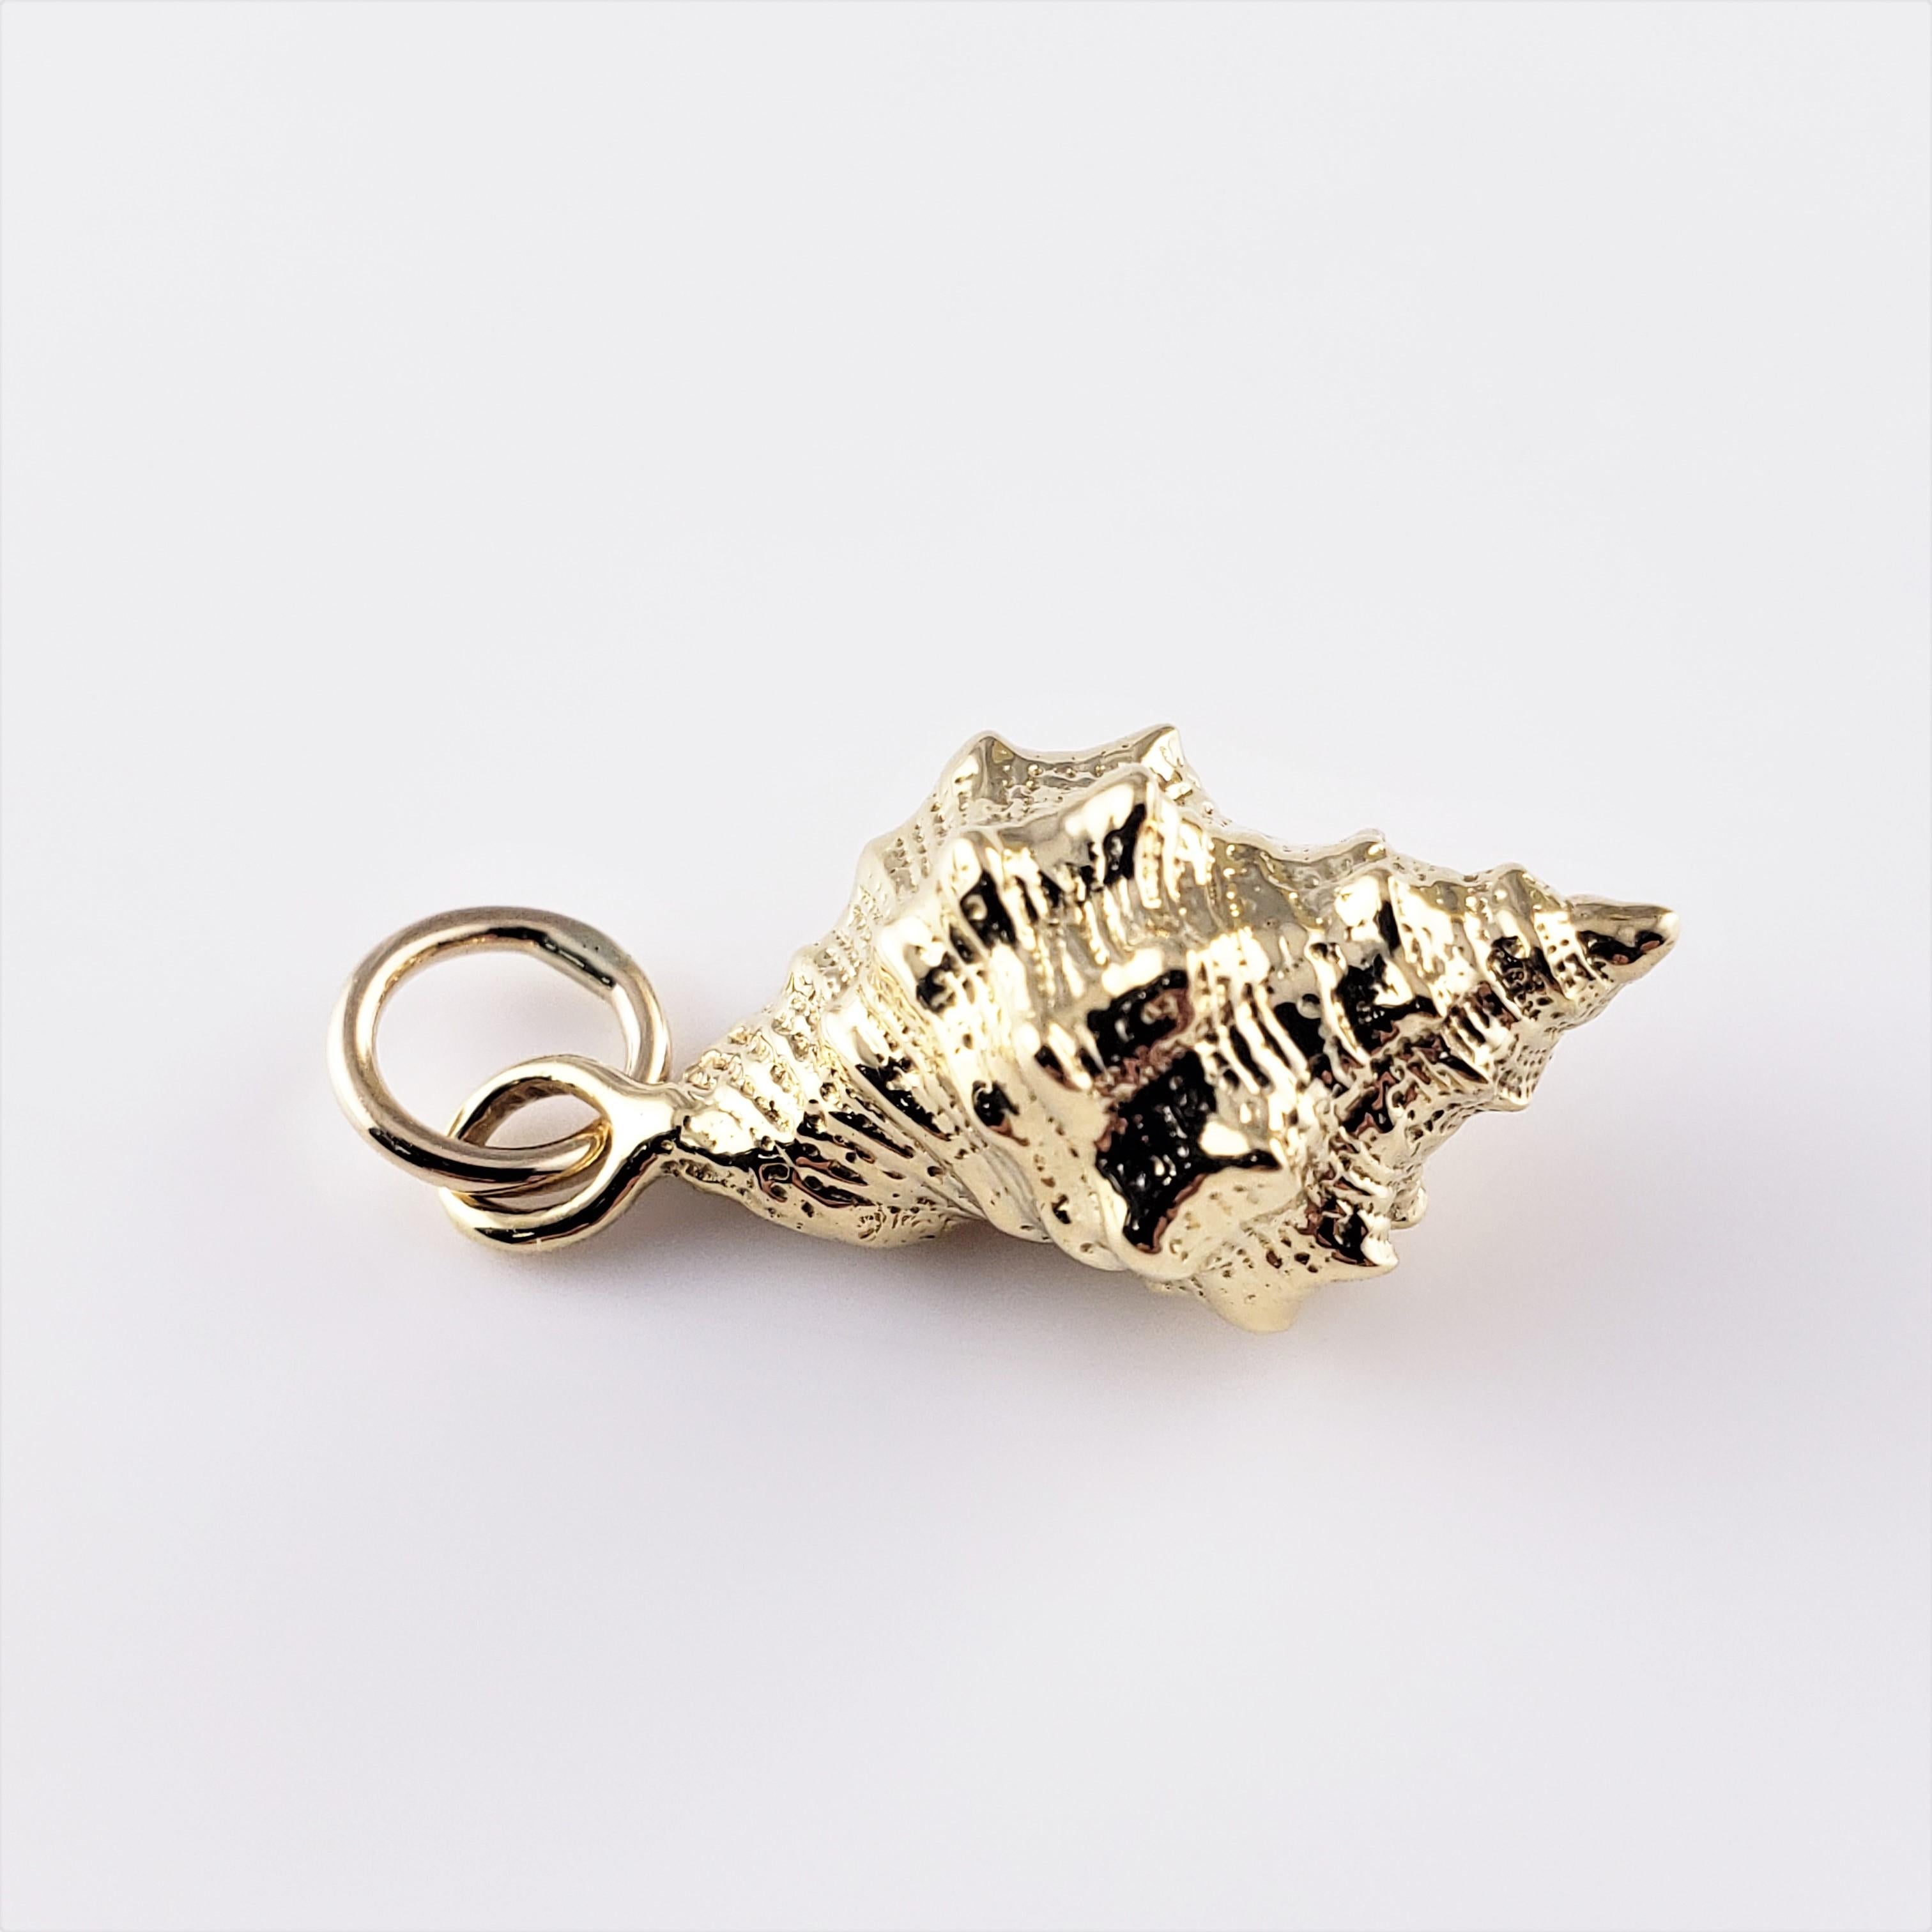 Vintage 14 Karat Yellow Gold Conch Shell Charm-

One of nature's treasures!

This lovely 3D charm features a miniature conch shell meticulously detailed in 14K yellow gold.

*Chain not included

Size: 21 mm x 11 mm (actual charm)

Weight: 2.5 dwt. /